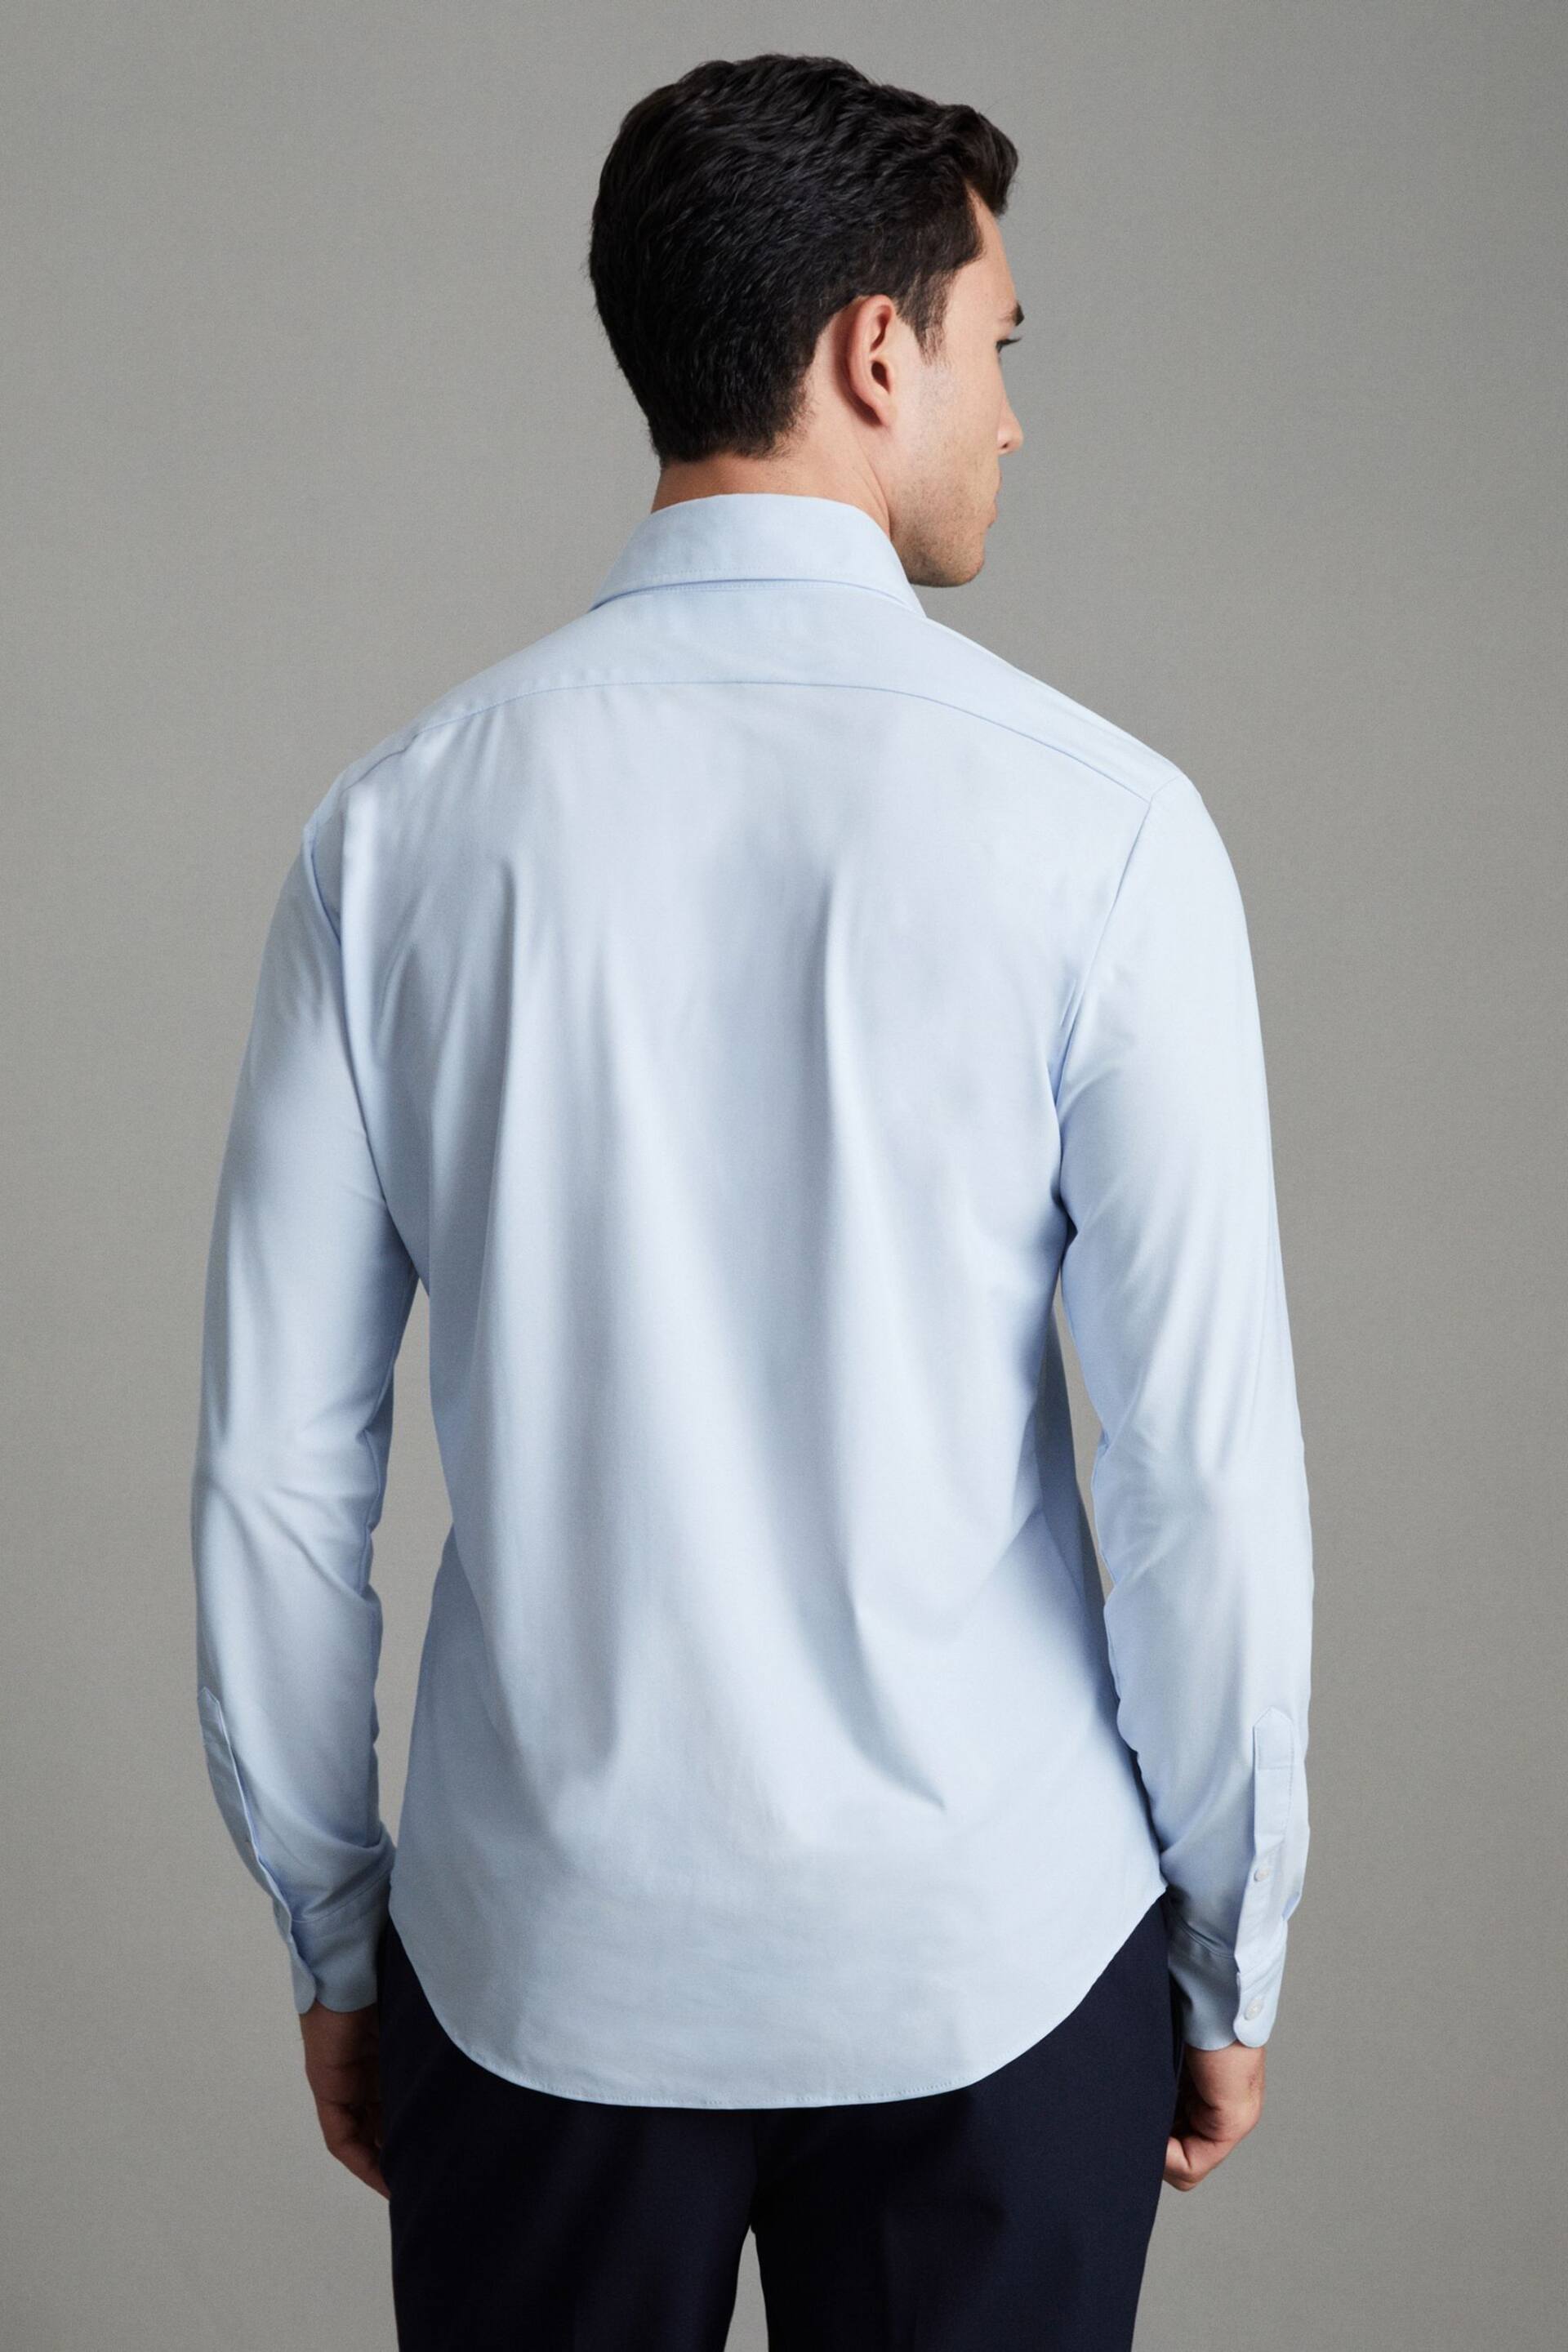 Reiss Soft Blue Voyager Slim Fit Button-Through Travel Shirt - Image 4 of 7